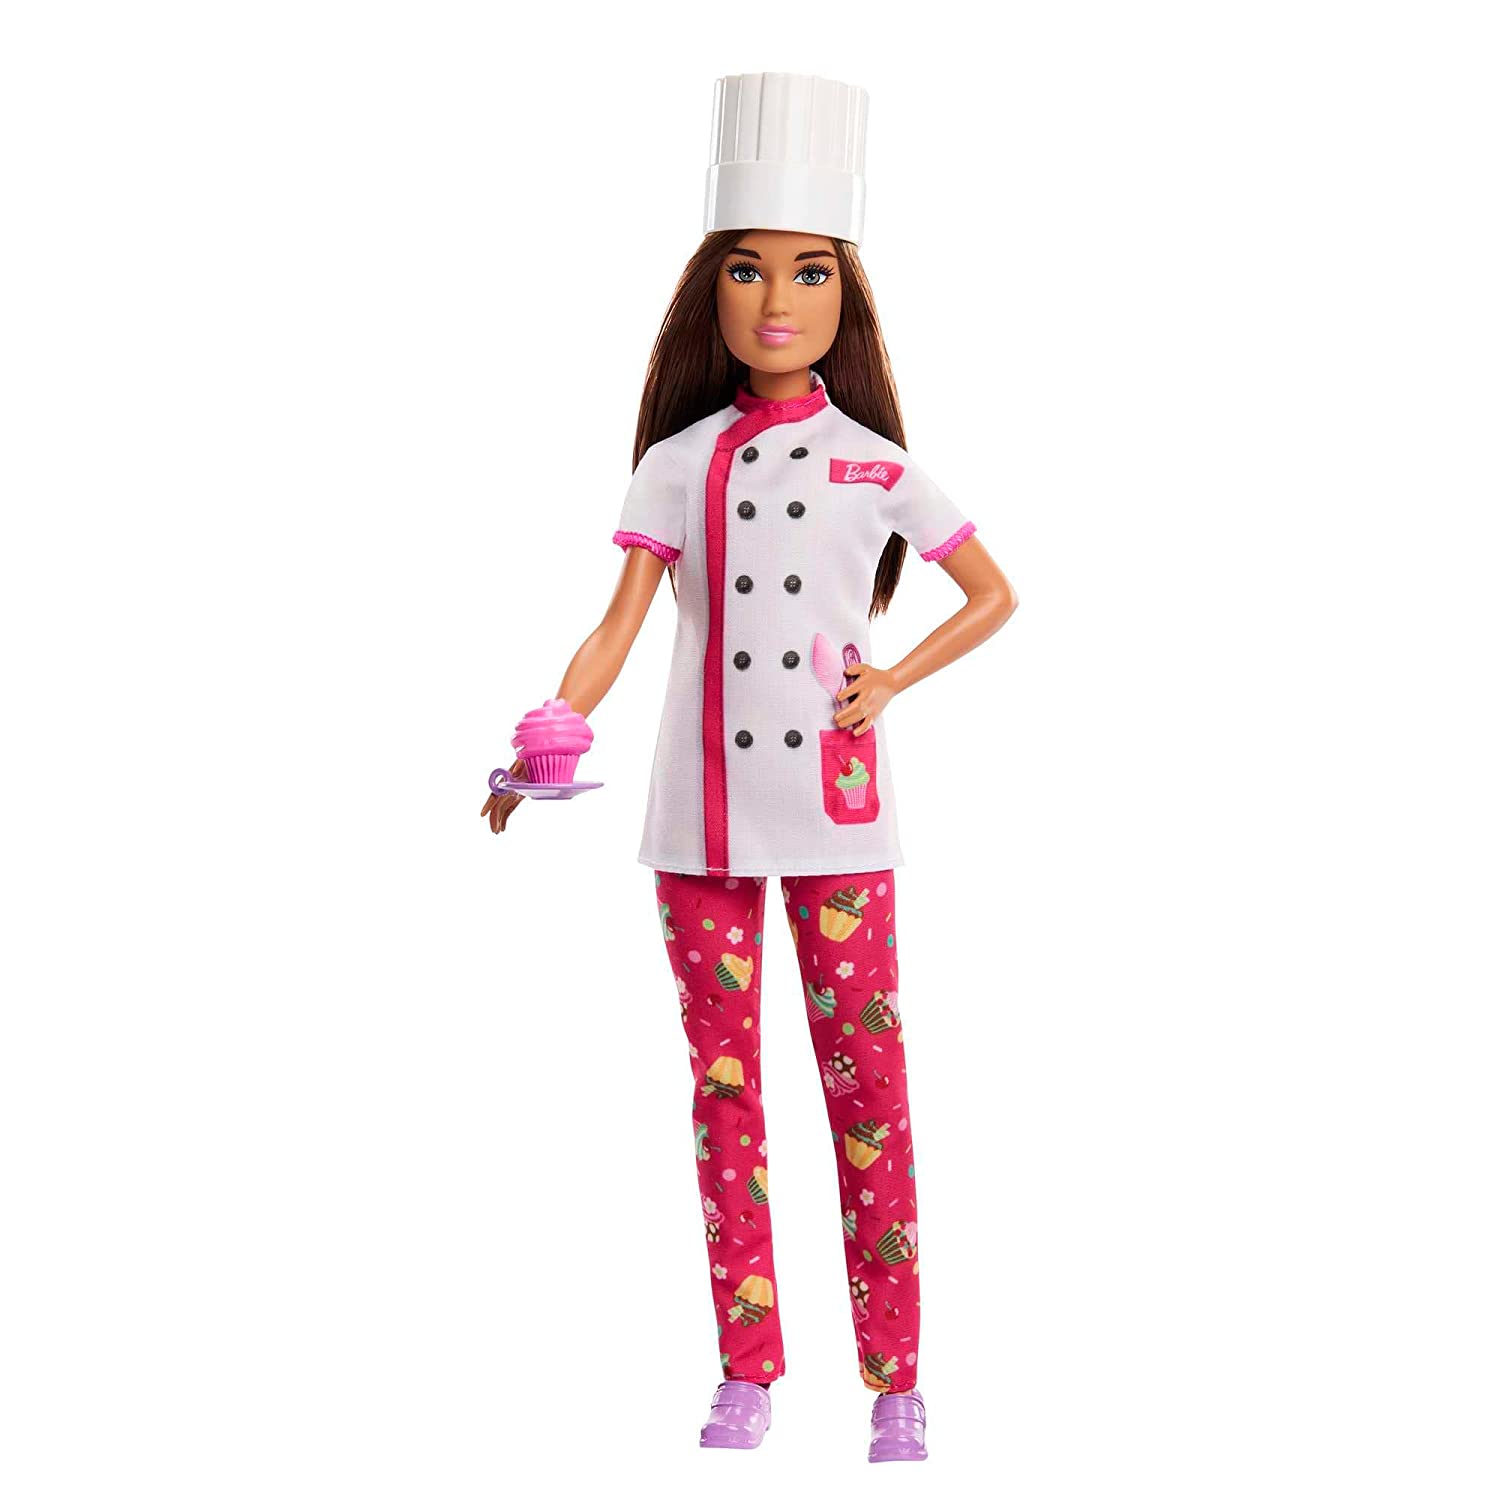 Barbie Pastry Chef Doll by Mattel -Mattel - India - www.superherotoystore.com